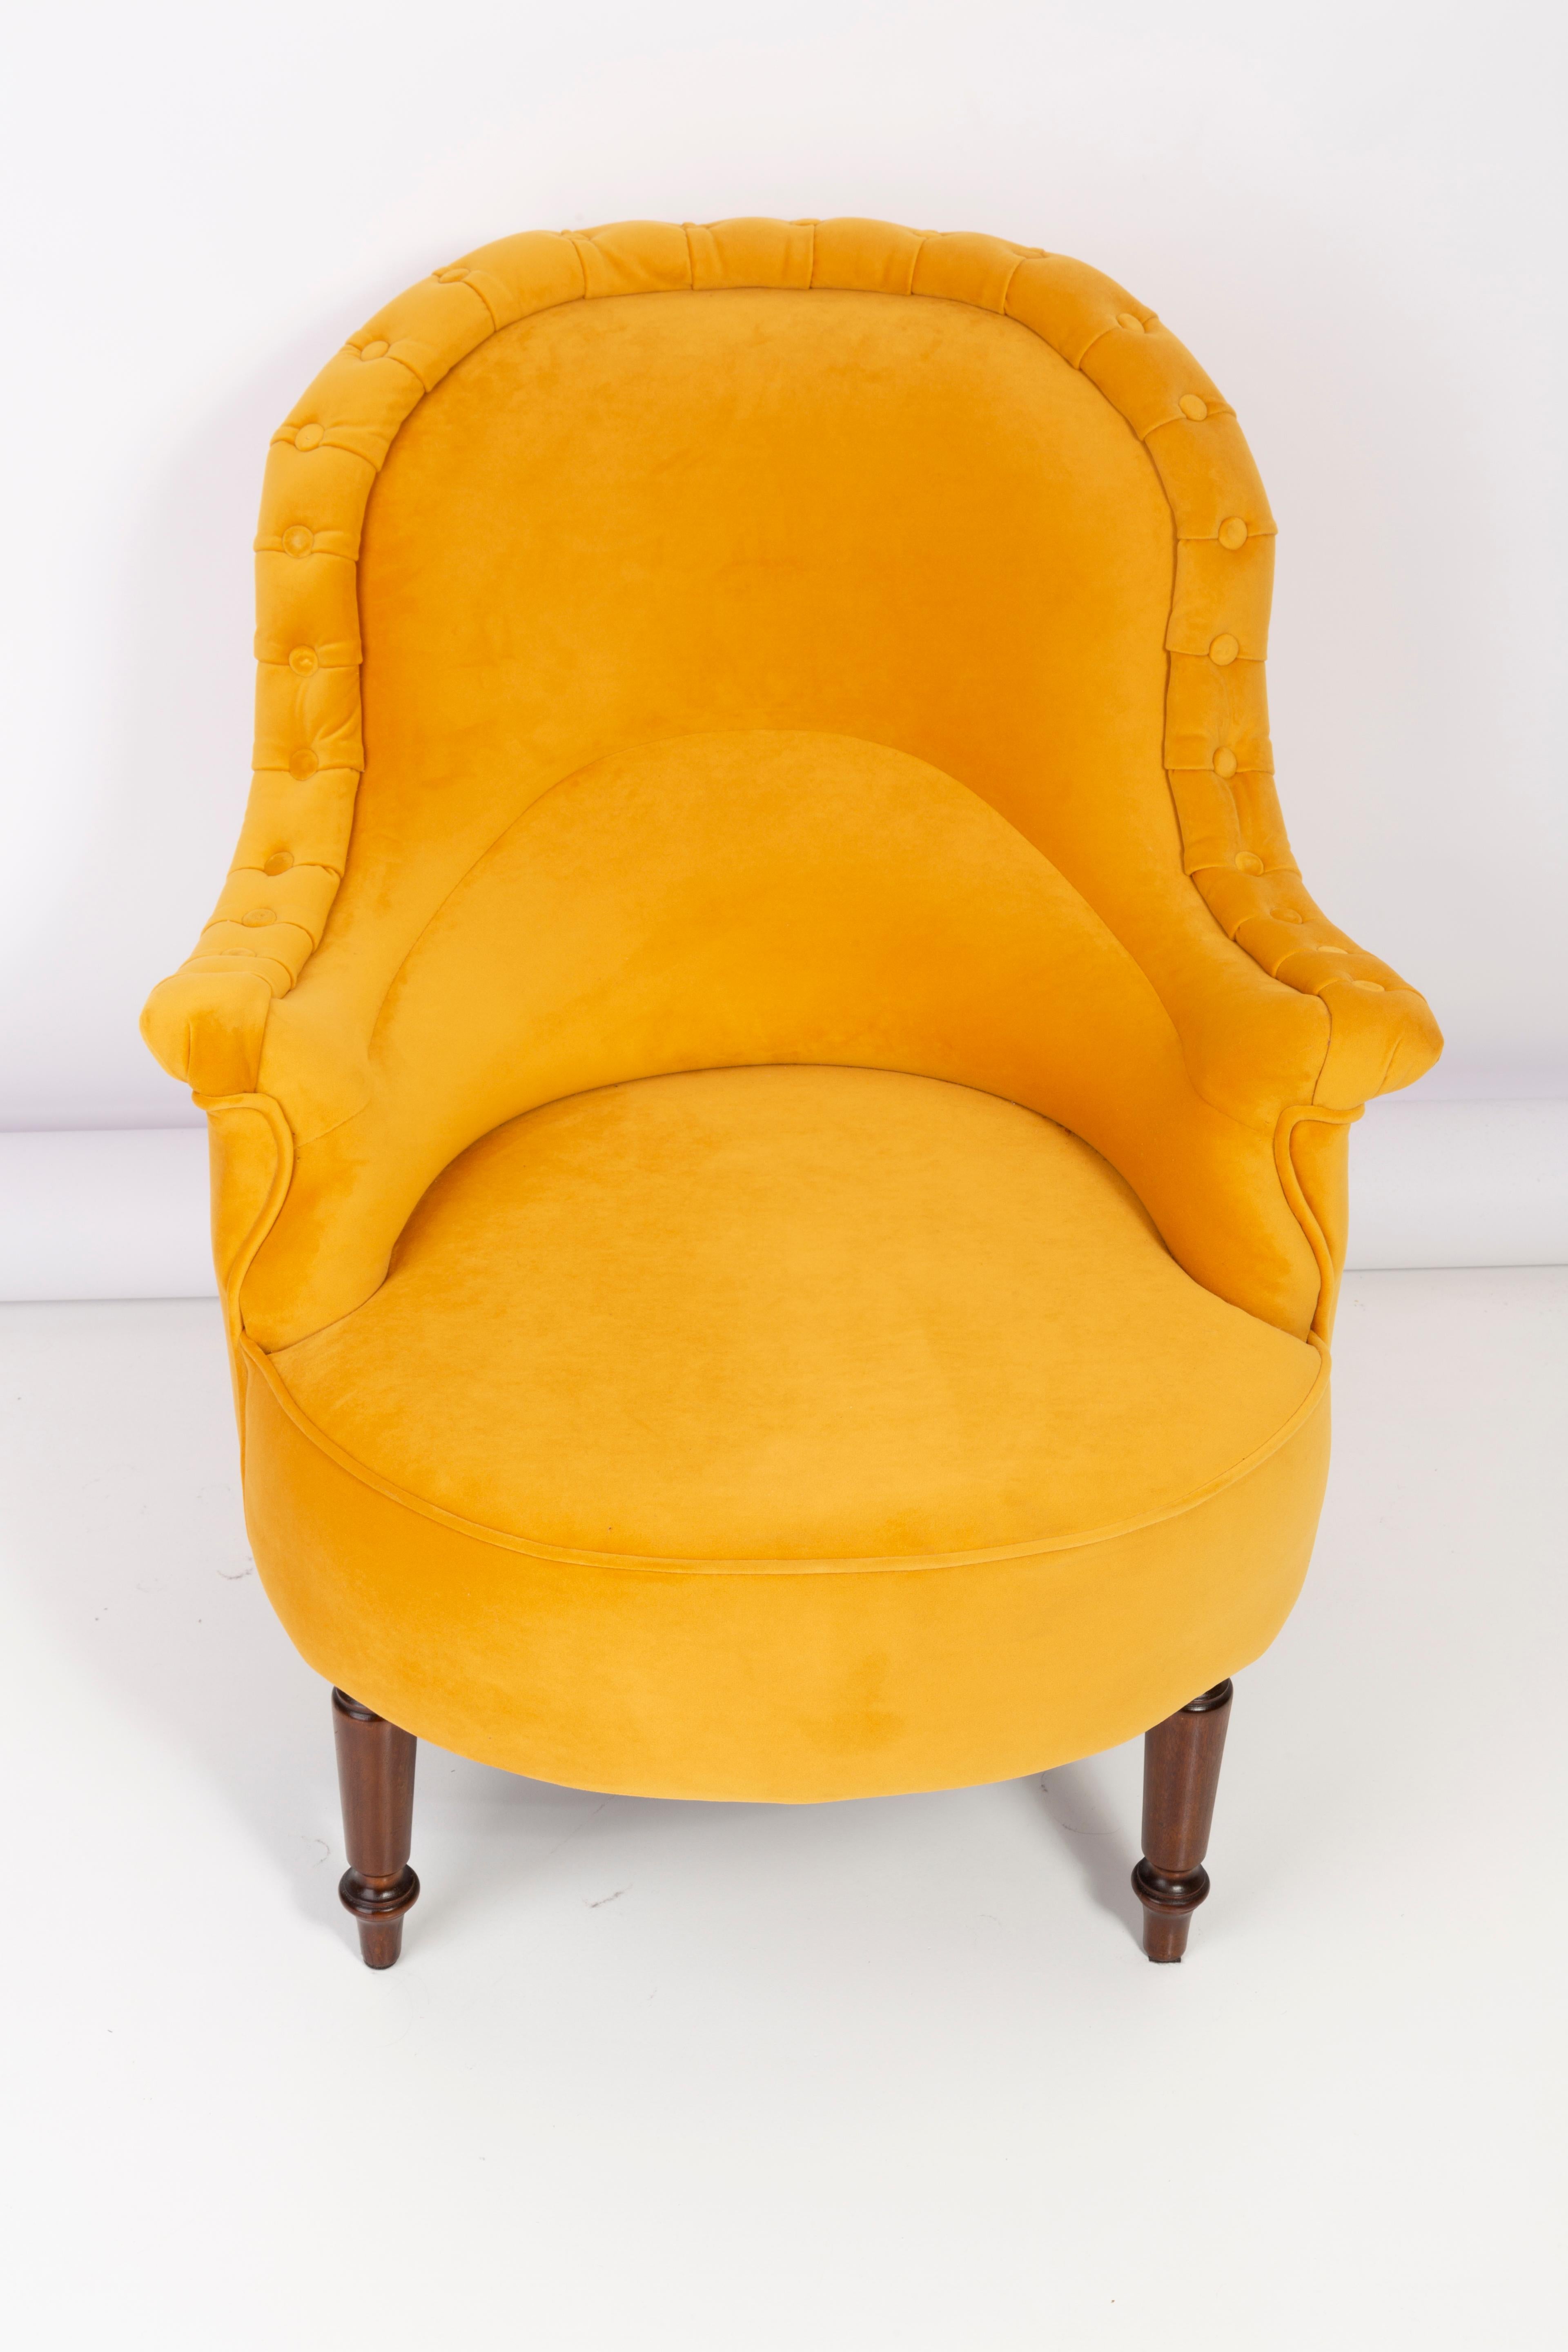 Unique Yellow Mustard Armchair, 1930s, Germany In Excellent Condition For Sale In 05-080 Hornowek, PL